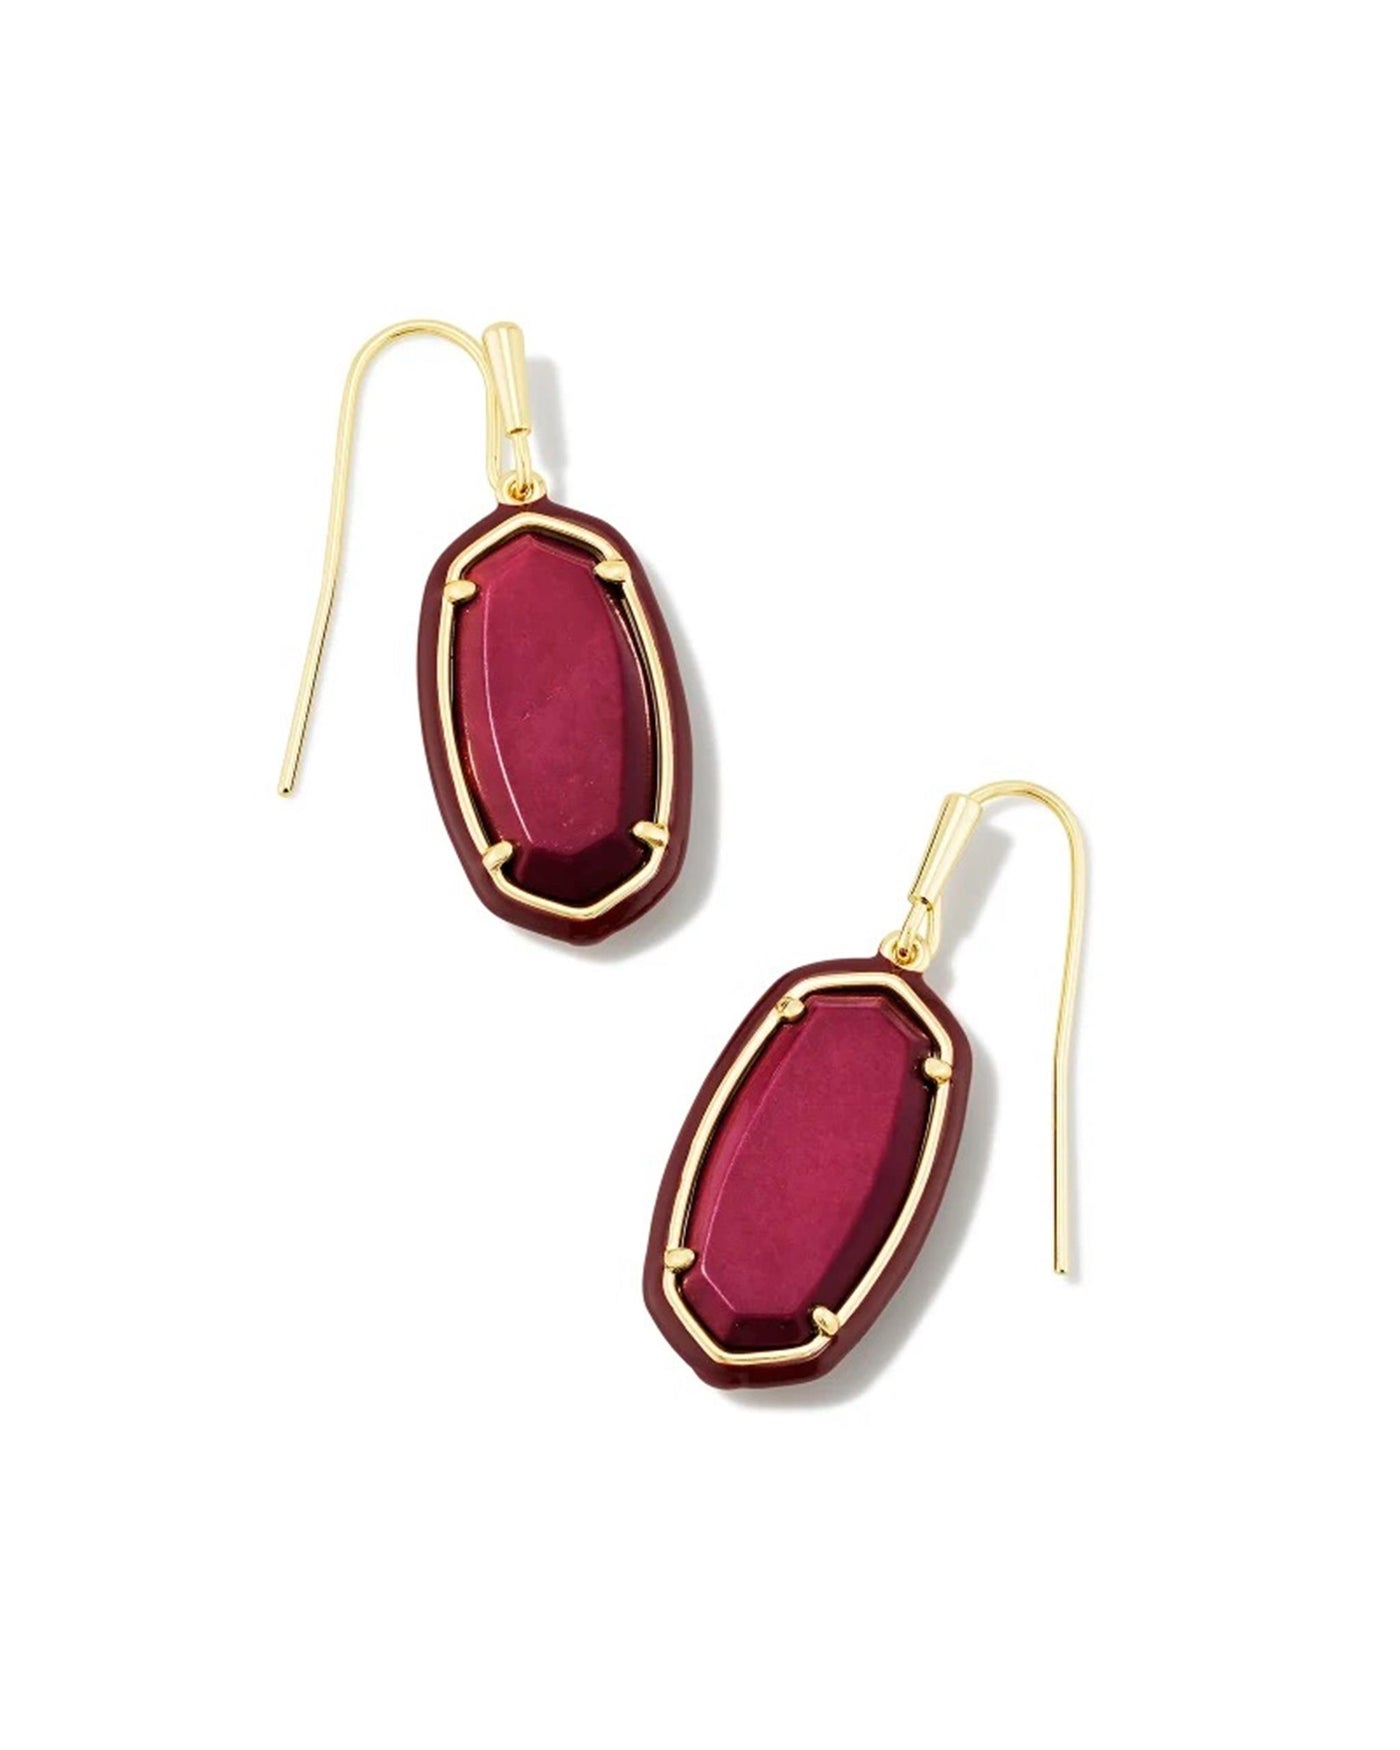 Gold Tone Earrings Featuring Maroon Magnesite by Kendra Scott